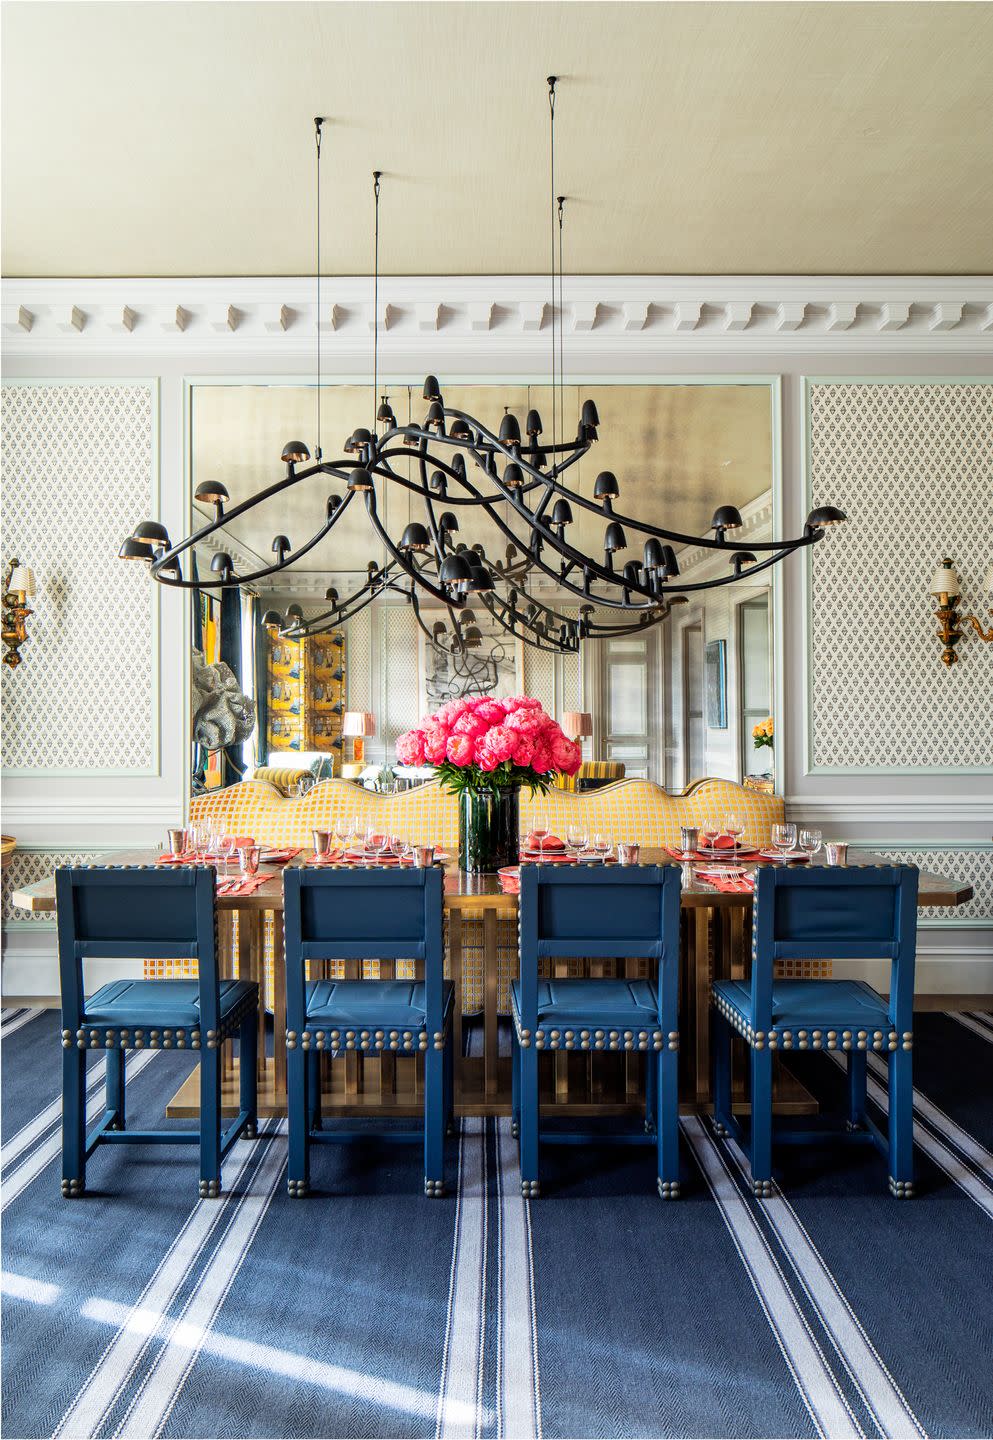 blue dining chairs surround a dining table with orange place settings and pink peonies